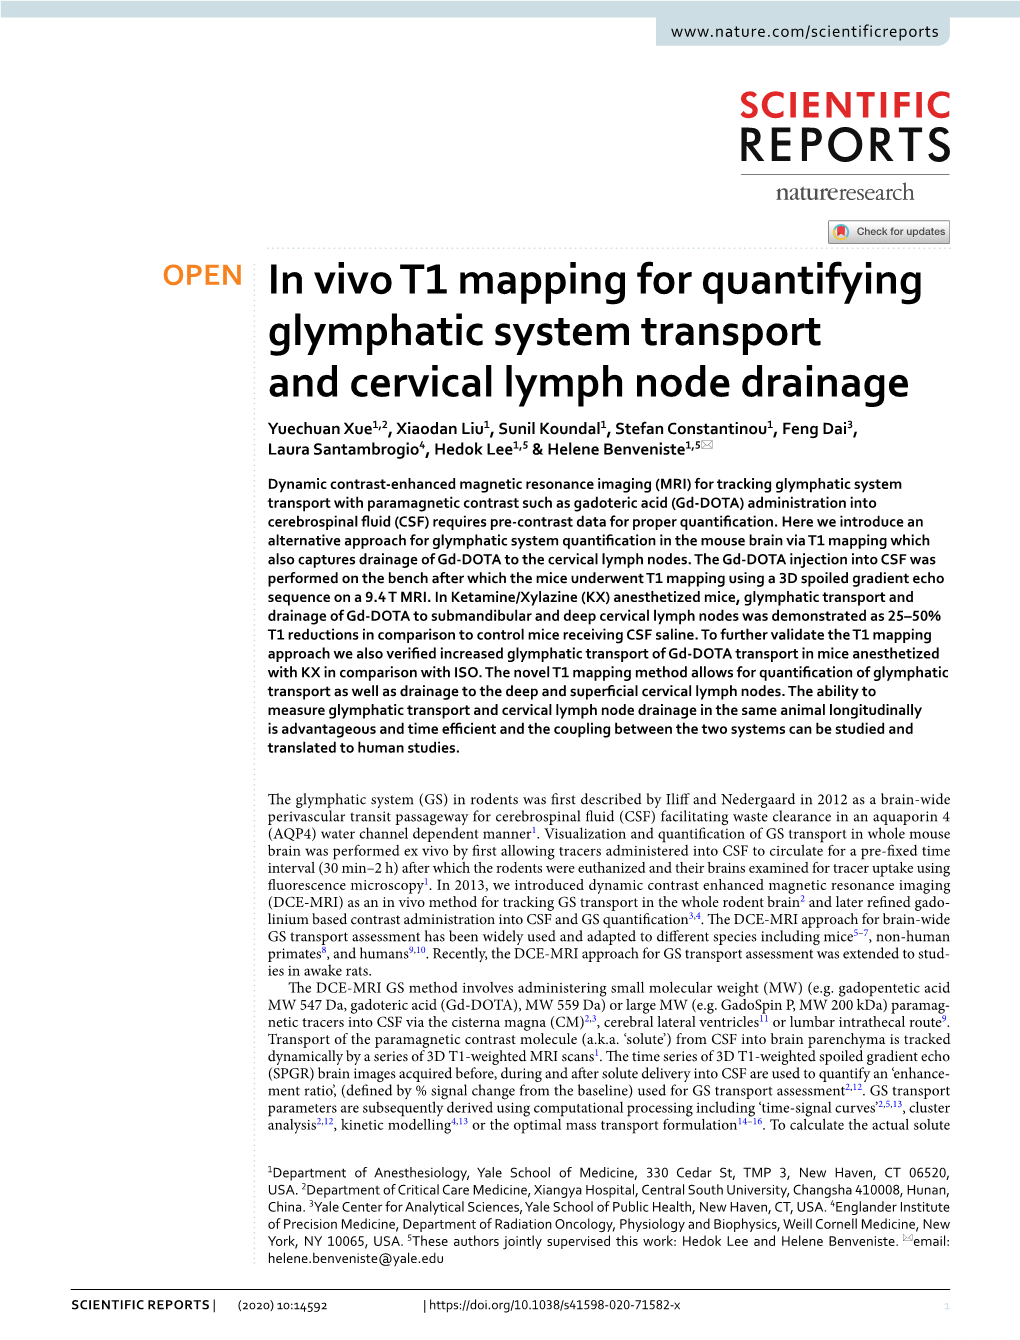 In Vivo T1 Mapping for Quantifying Glymphatic System Transport And